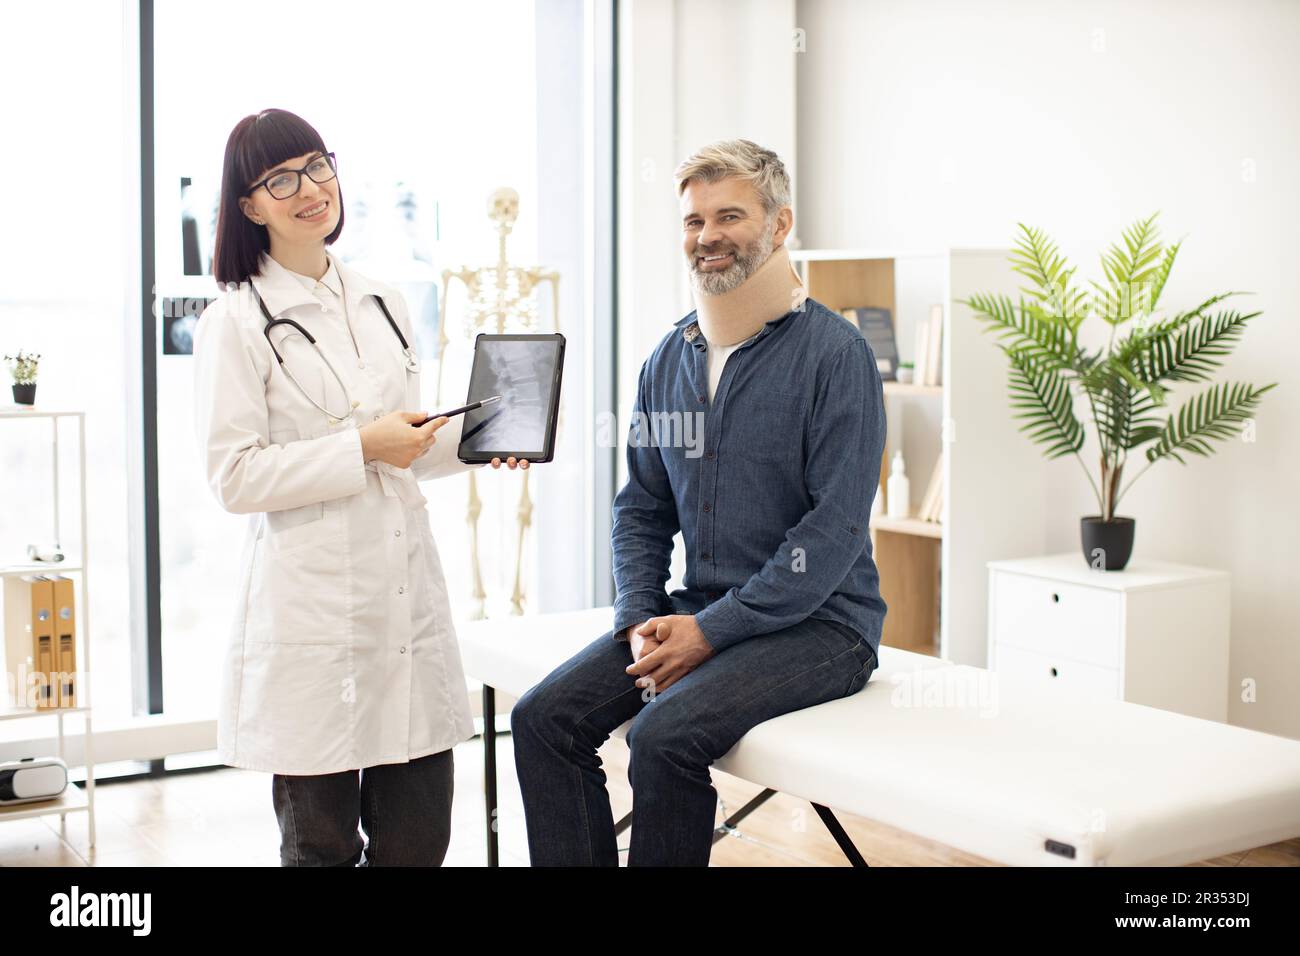 Cheerful young woman with digital tablet and smiling mature man in cervical collar posing in doctor's office. Therapist examining spine x-rays while happy patient sitting on exam couch indoors. Stock Photo